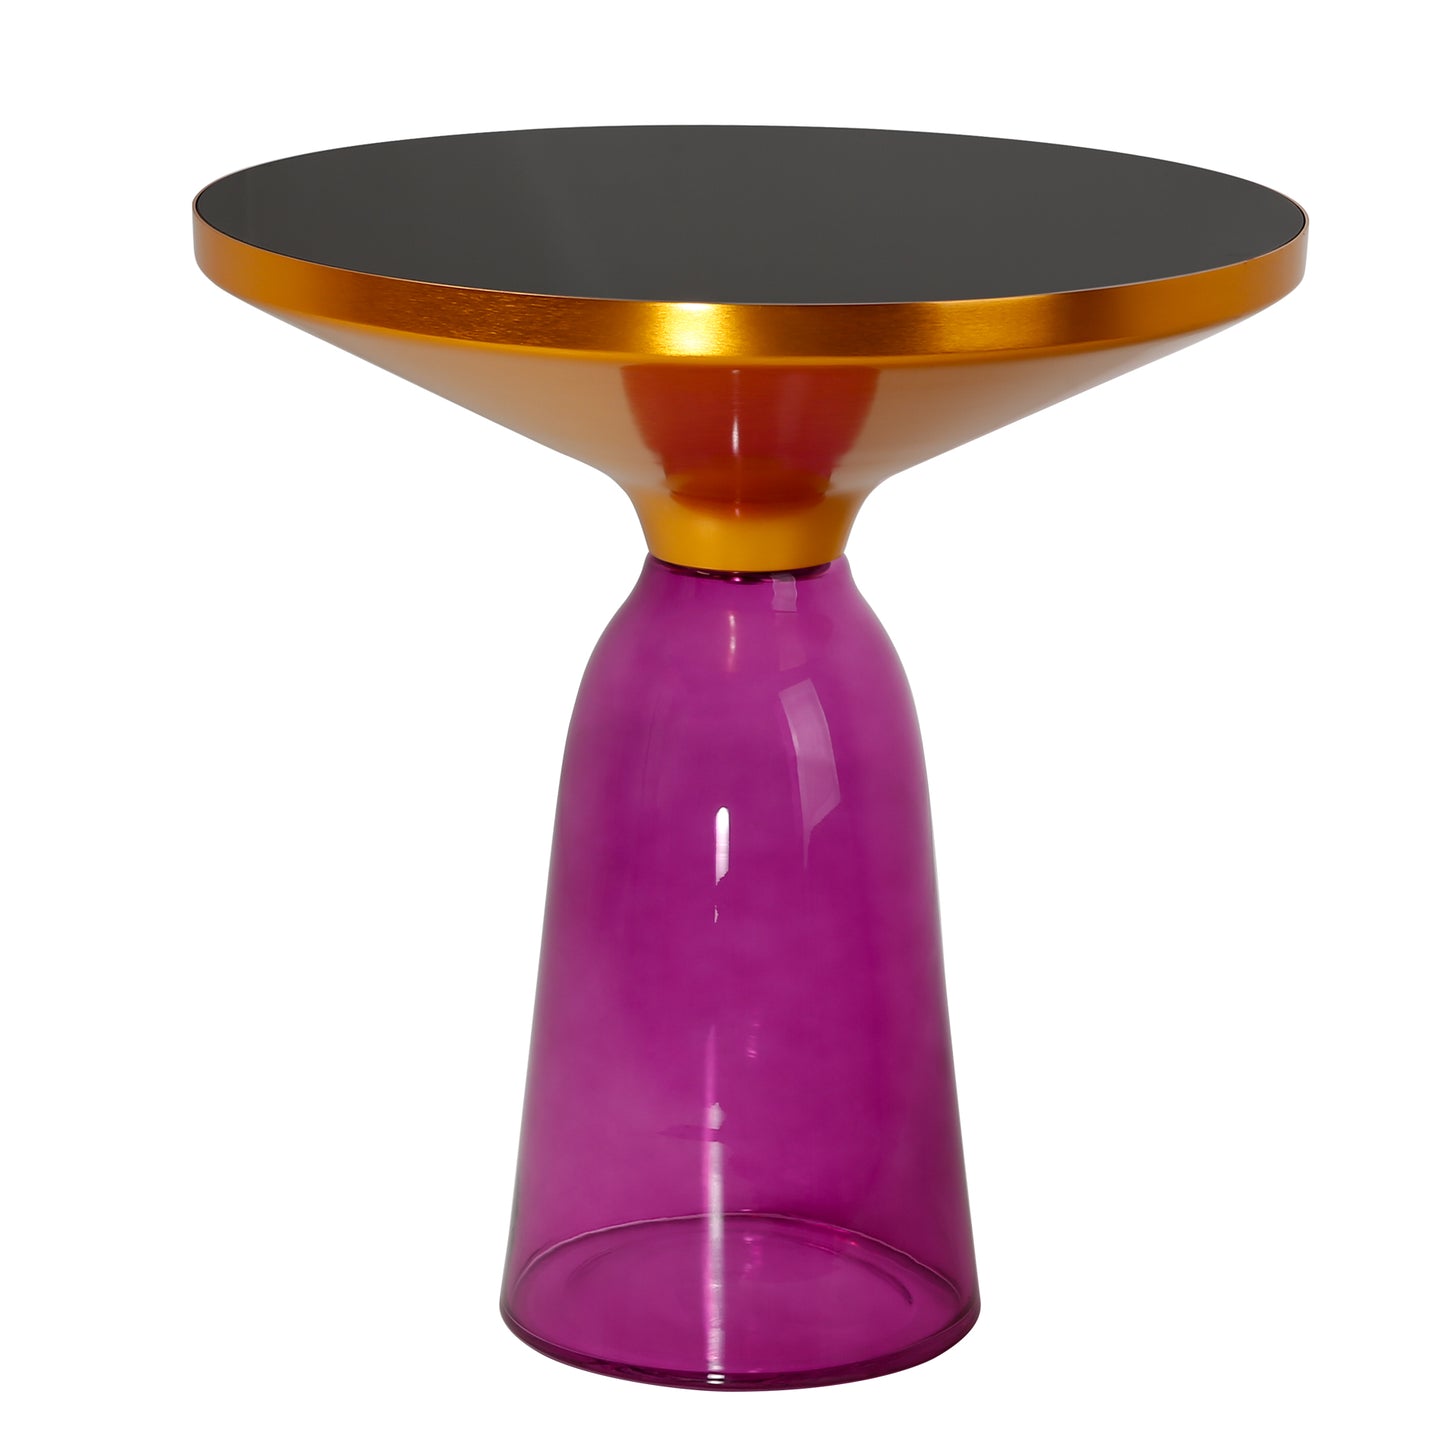 Bell coffee table and side table 3 colour in stock!